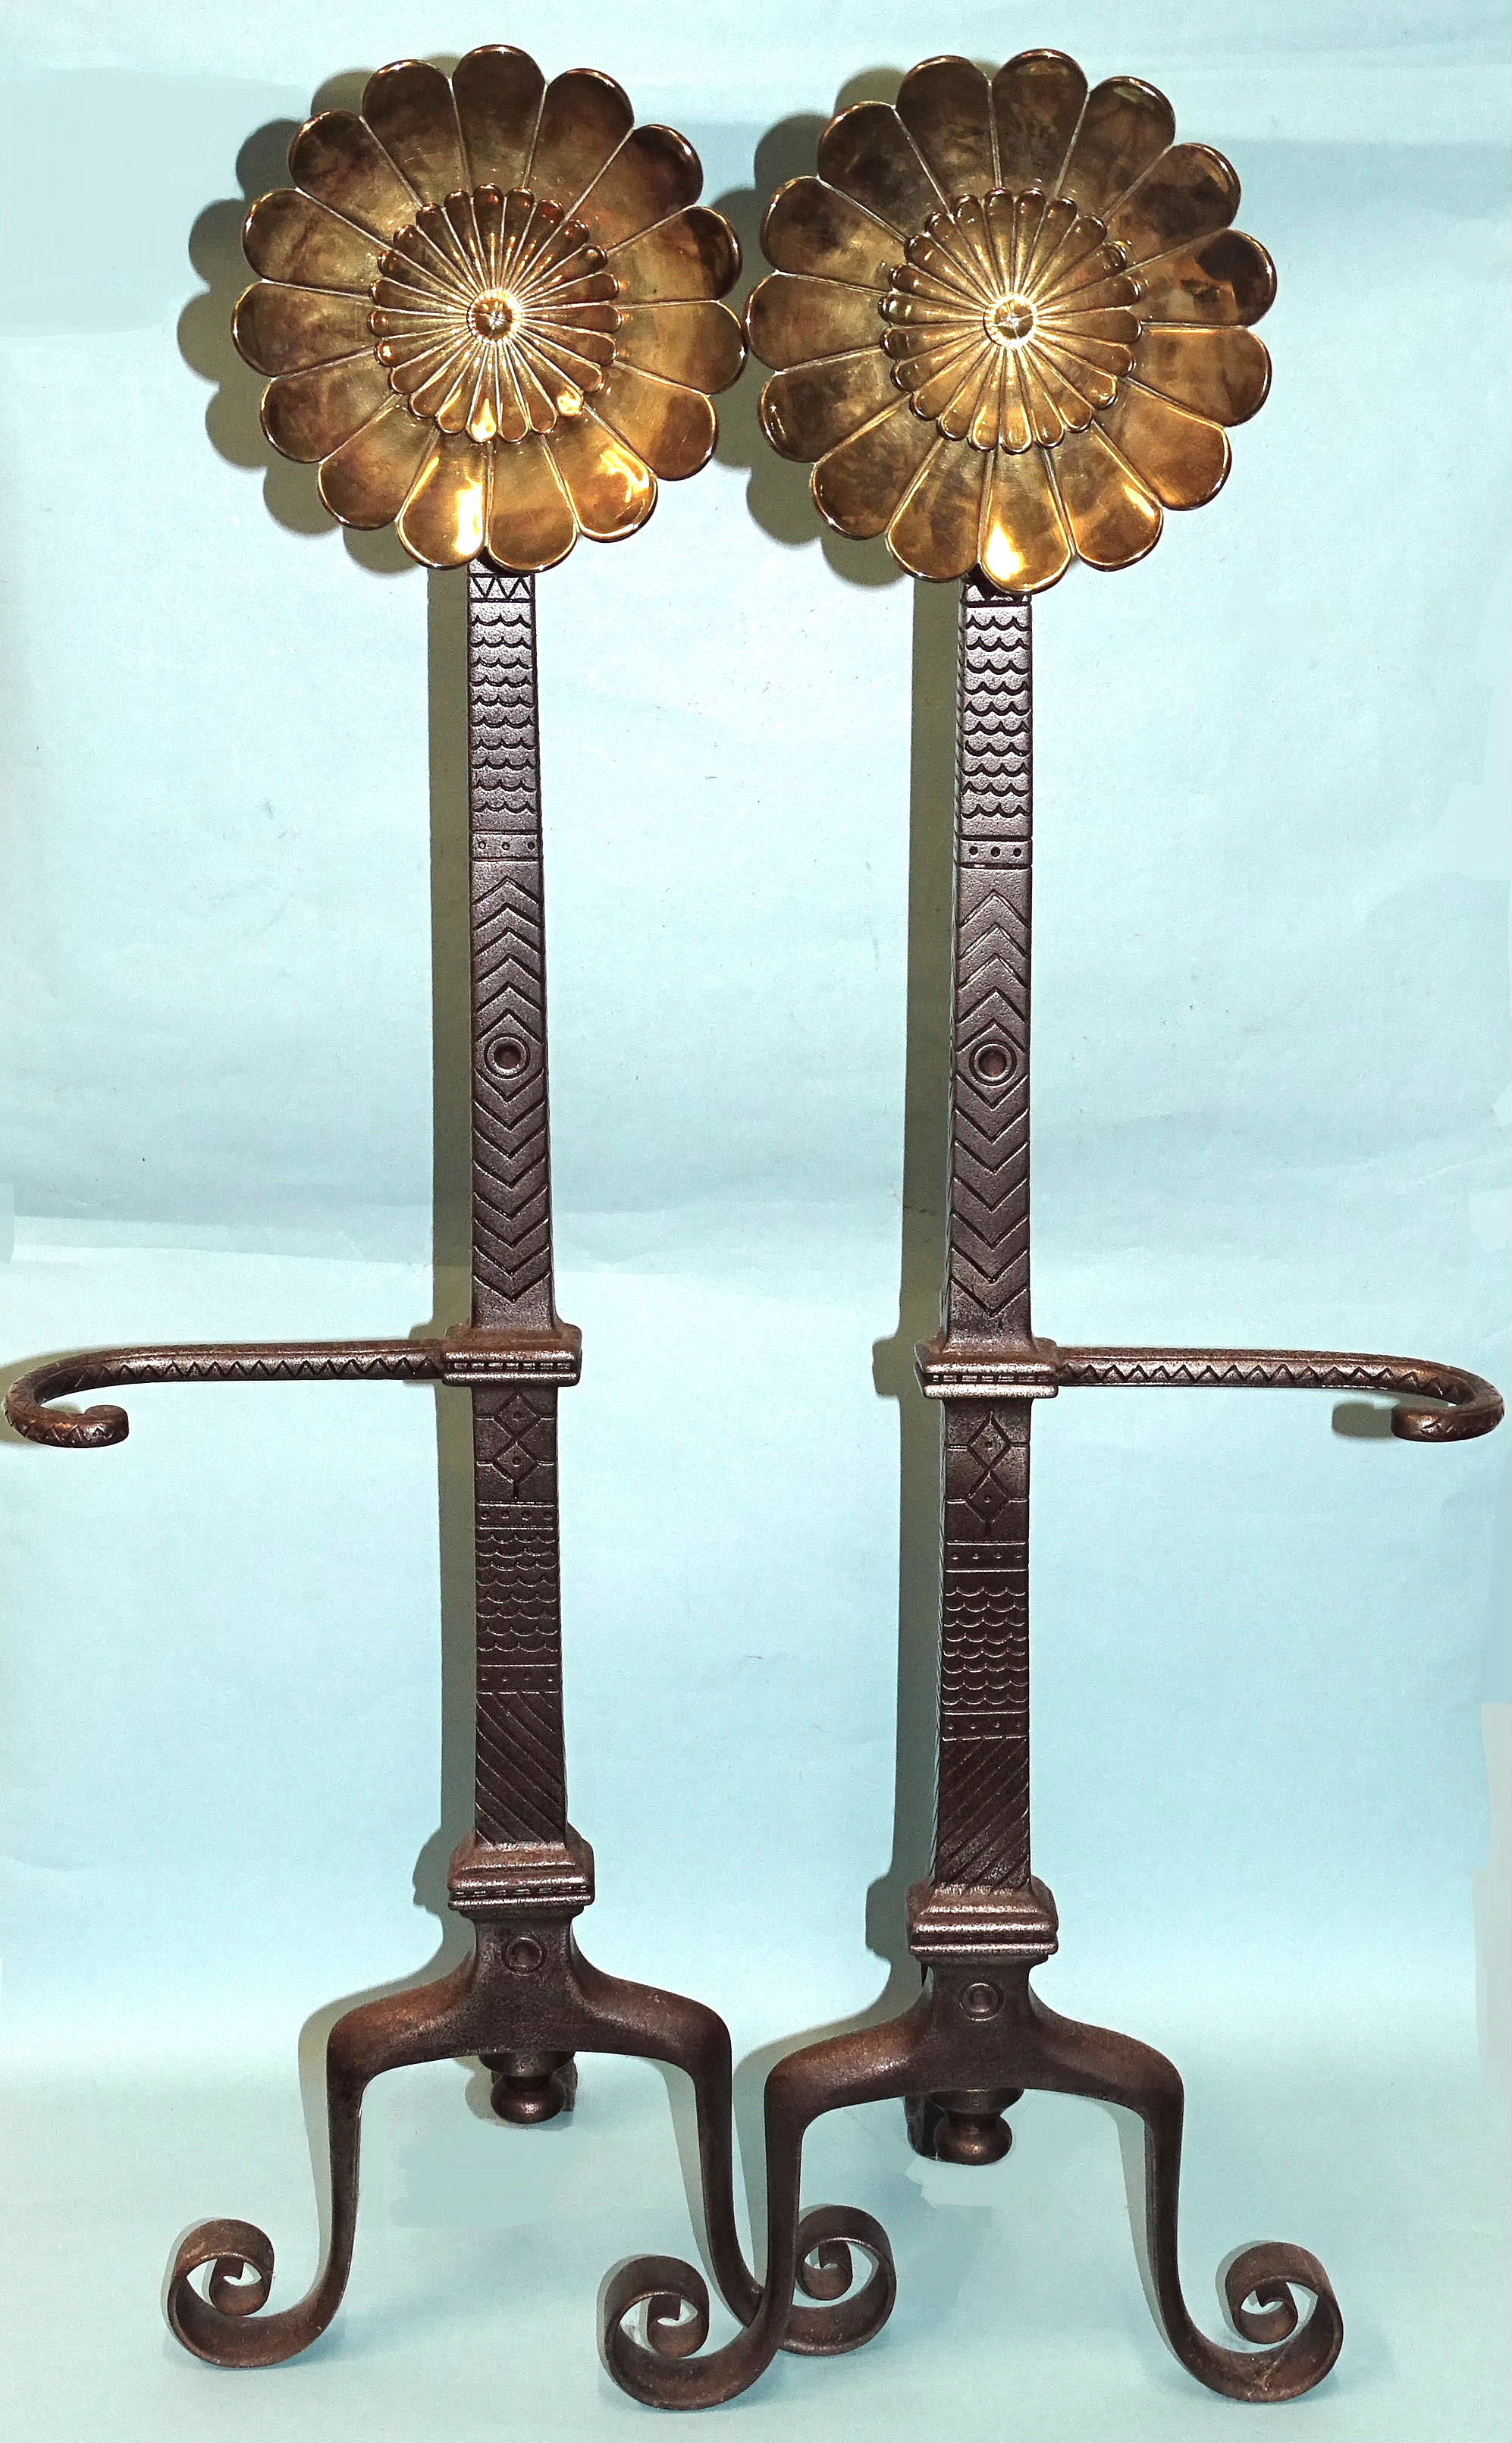 A pair of iron fire dogs in the Arts & Crafts style, each decorated overall with geometric designs